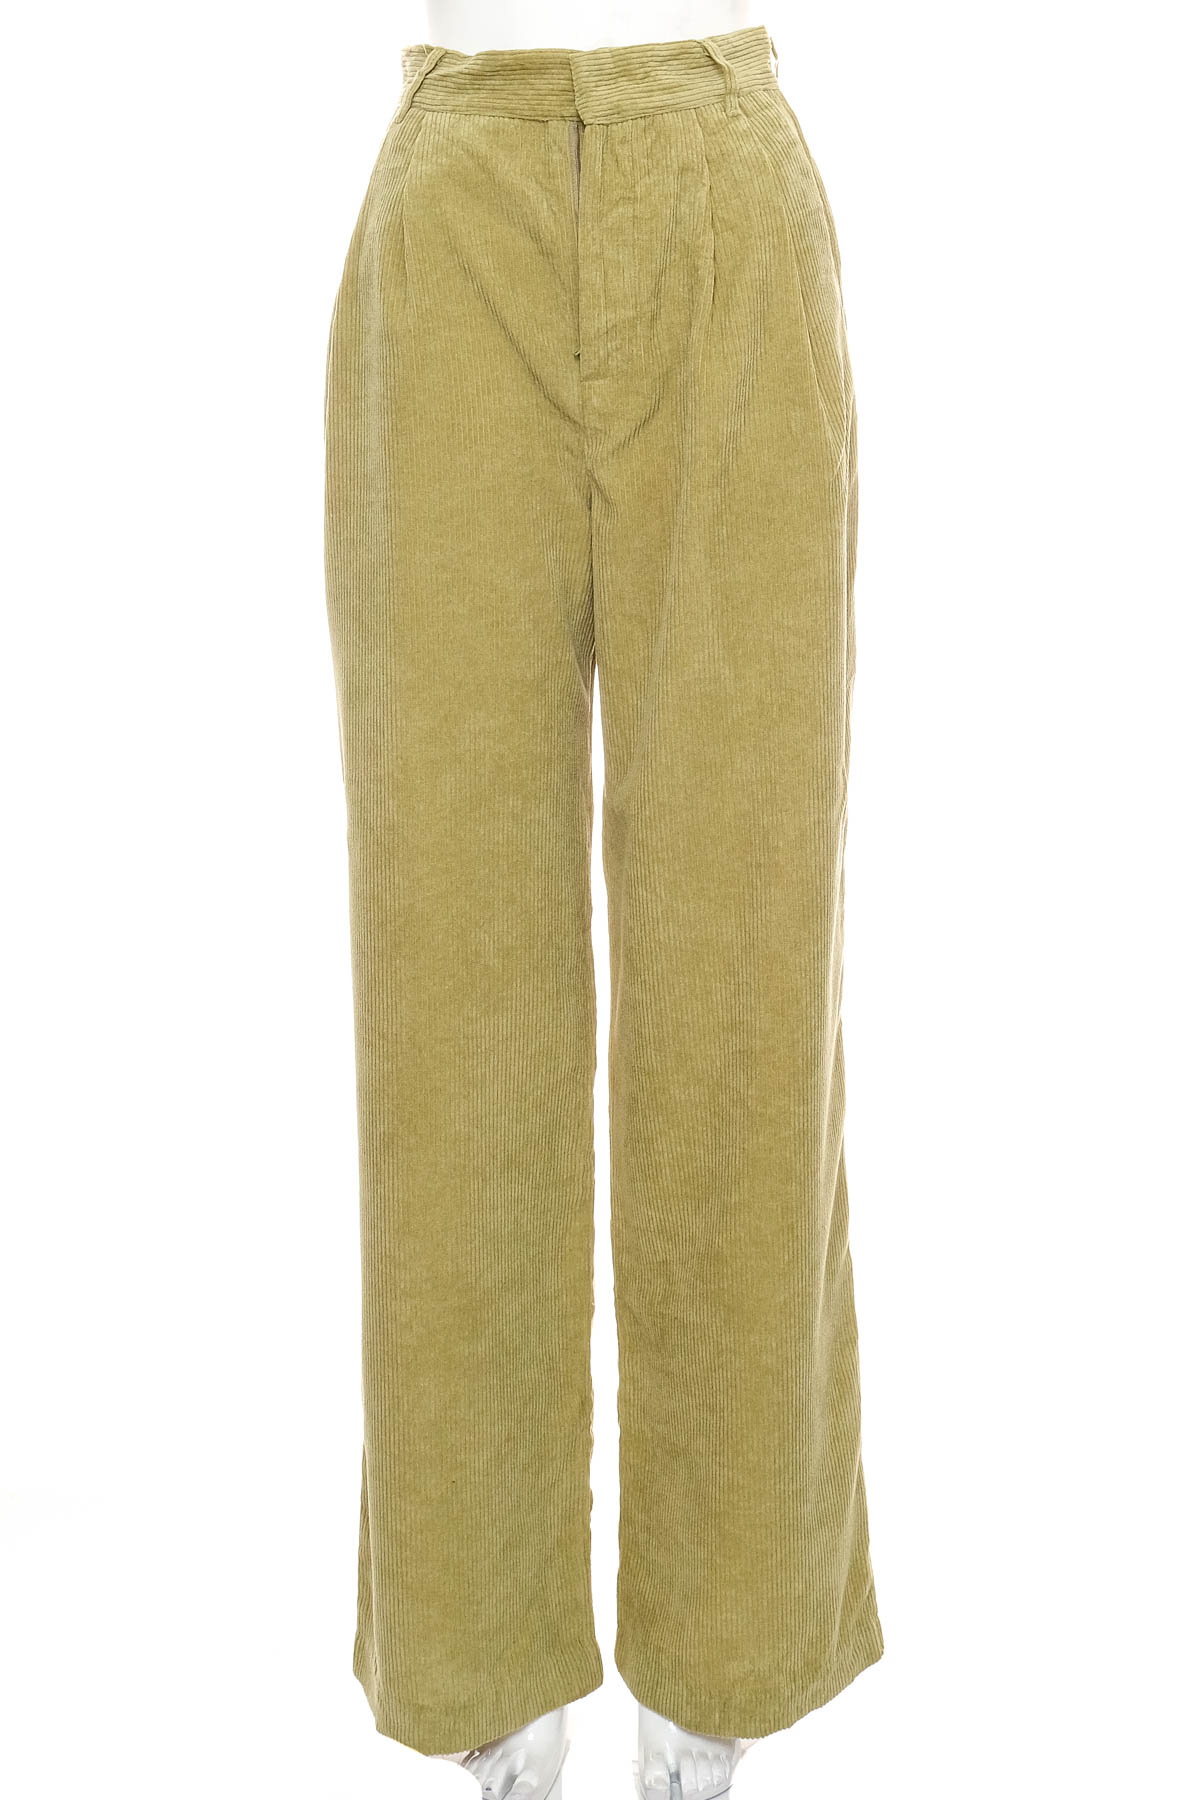 Women's trousers - Emory Park - 0